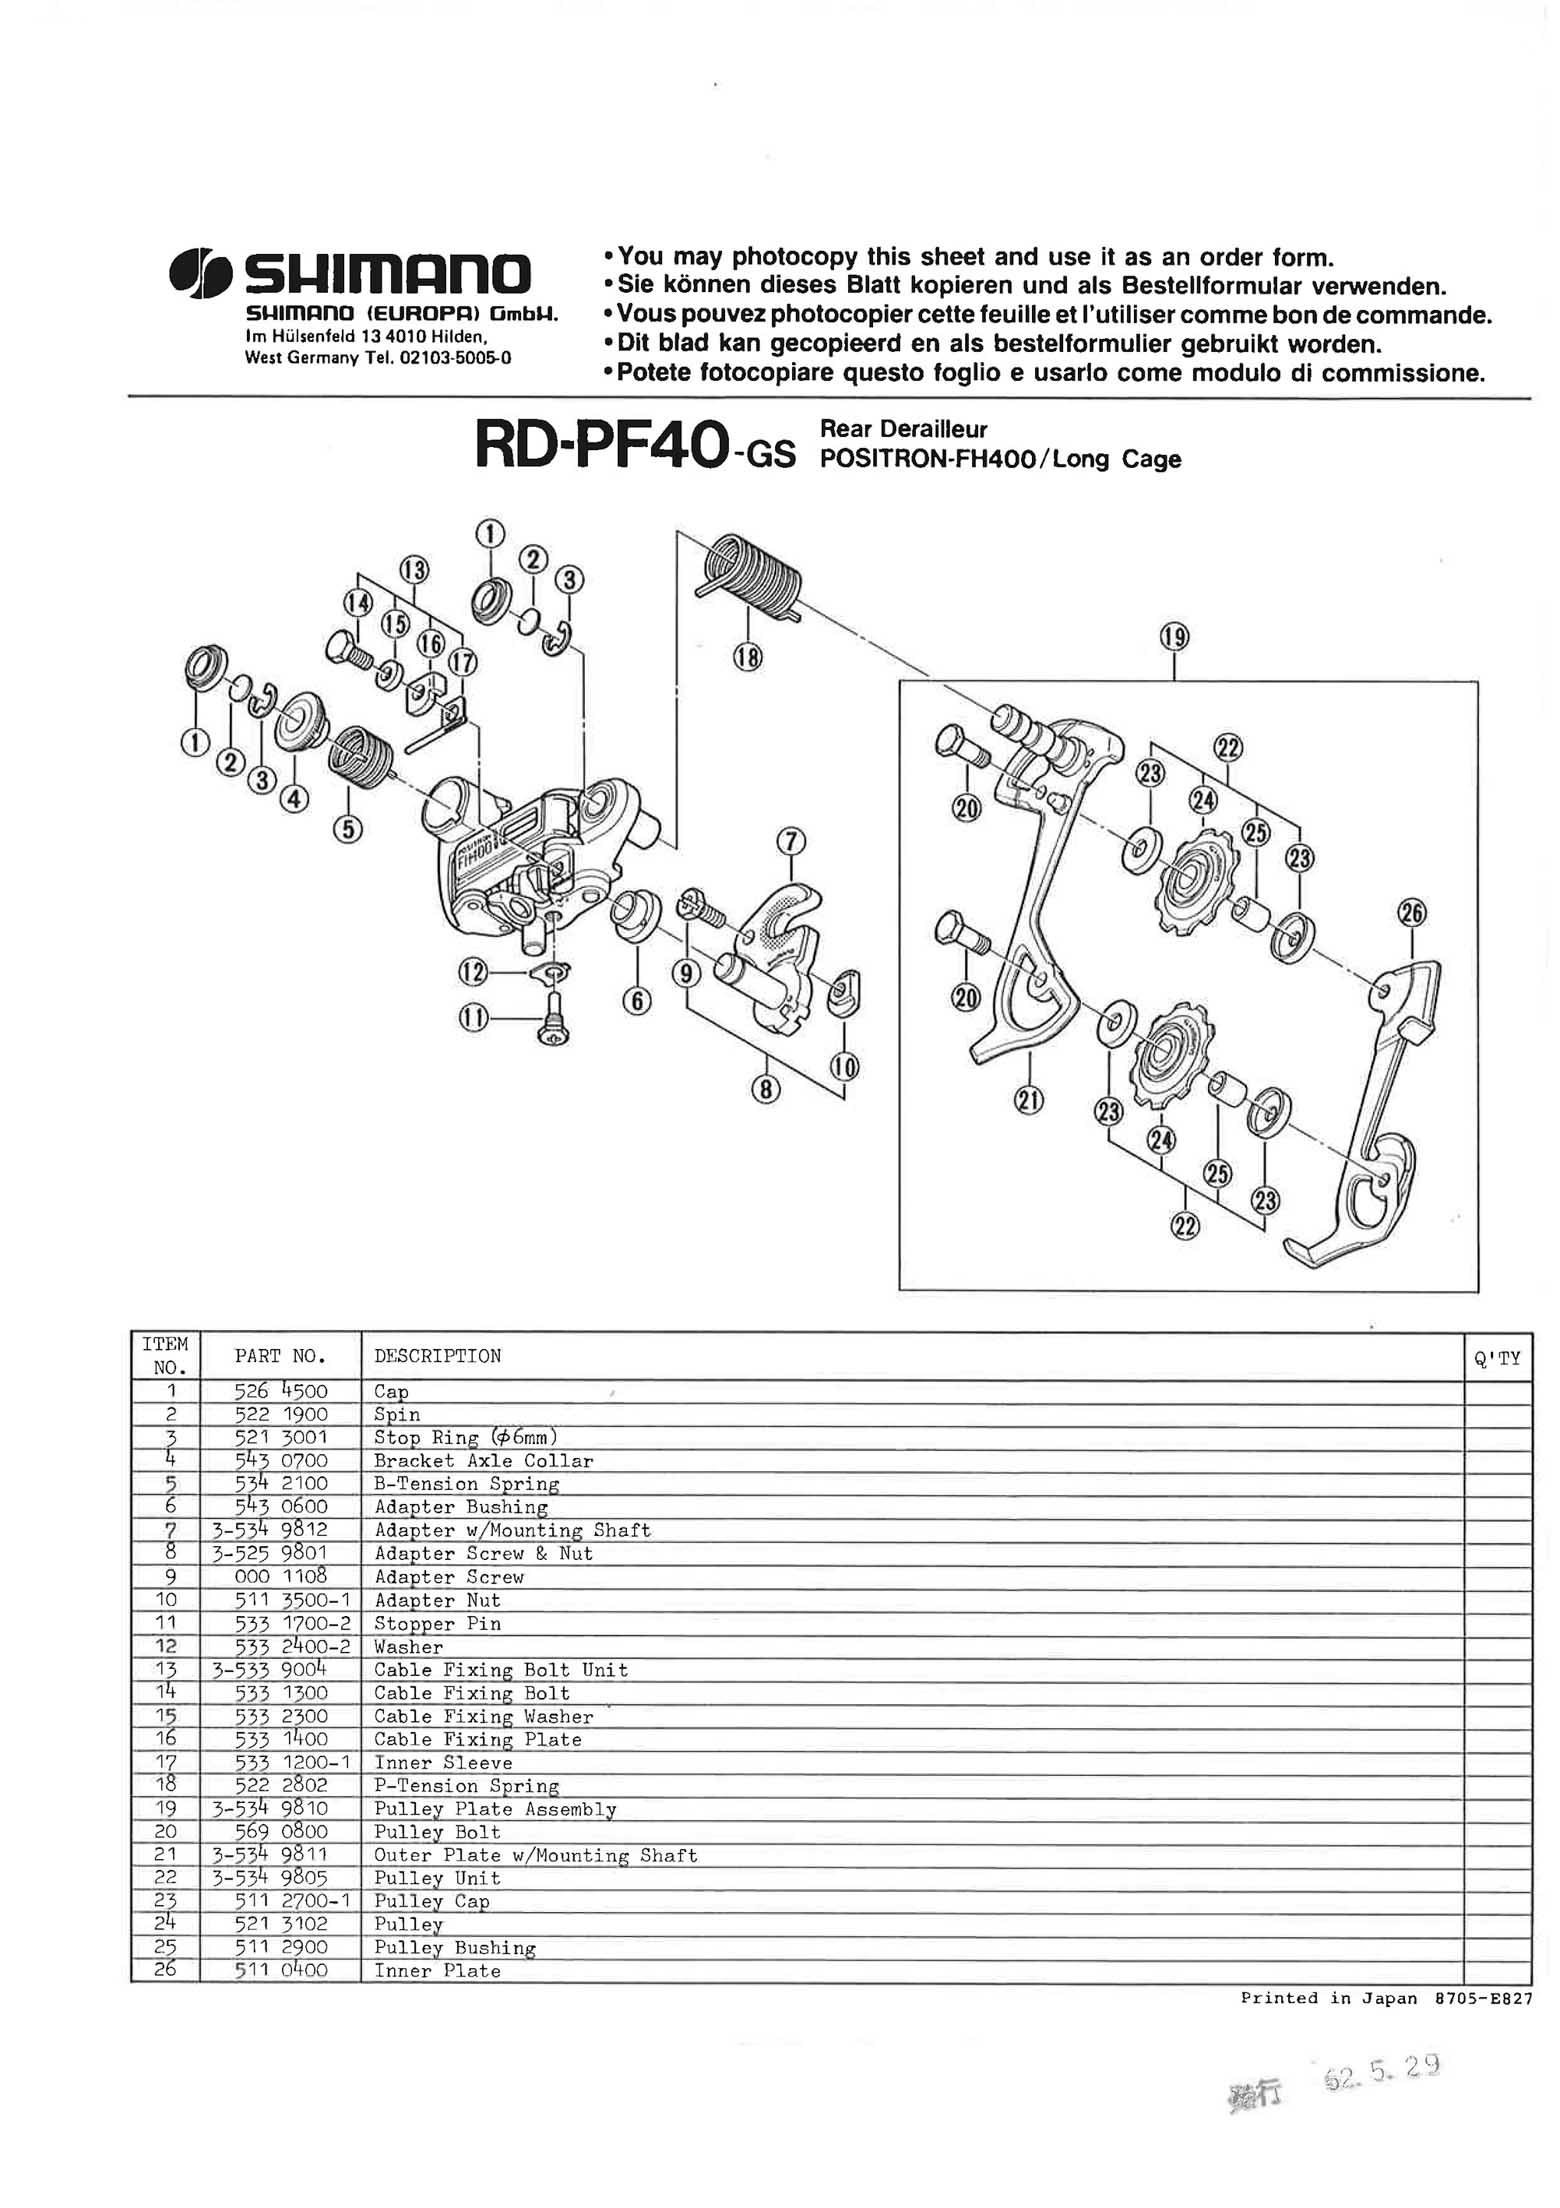 Shimano web site 2020 - exploded views from 1987 Positron FH 400 GS (PF40 GS) main image